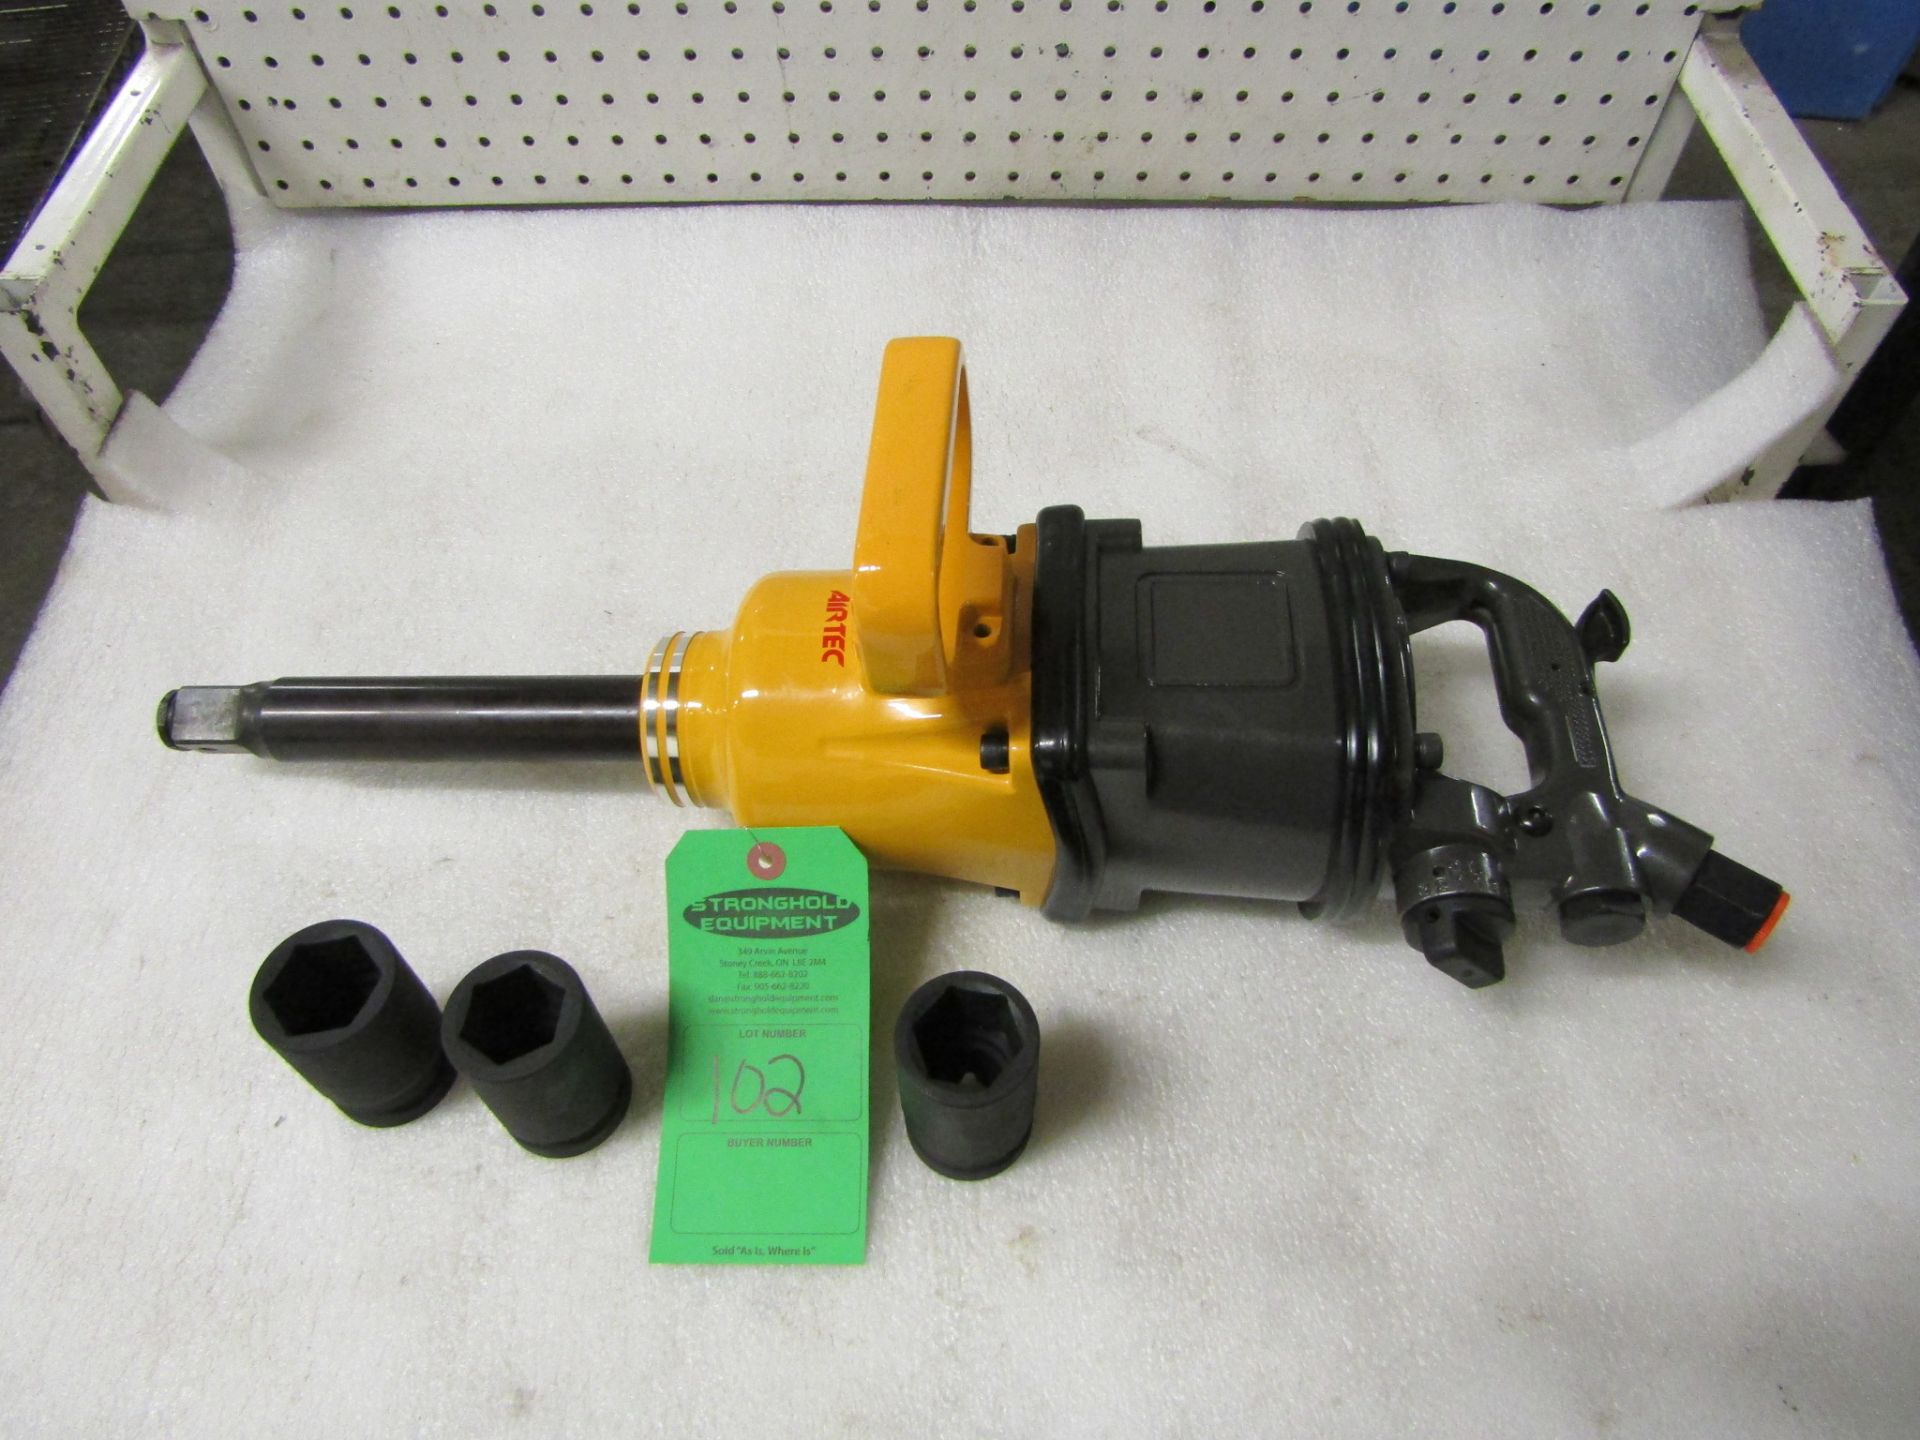 Airtec Extended Reach 1" Drive Air Impact Wrench - MINT UNUSED impact gun complete with sockets in - Image 2 of 2